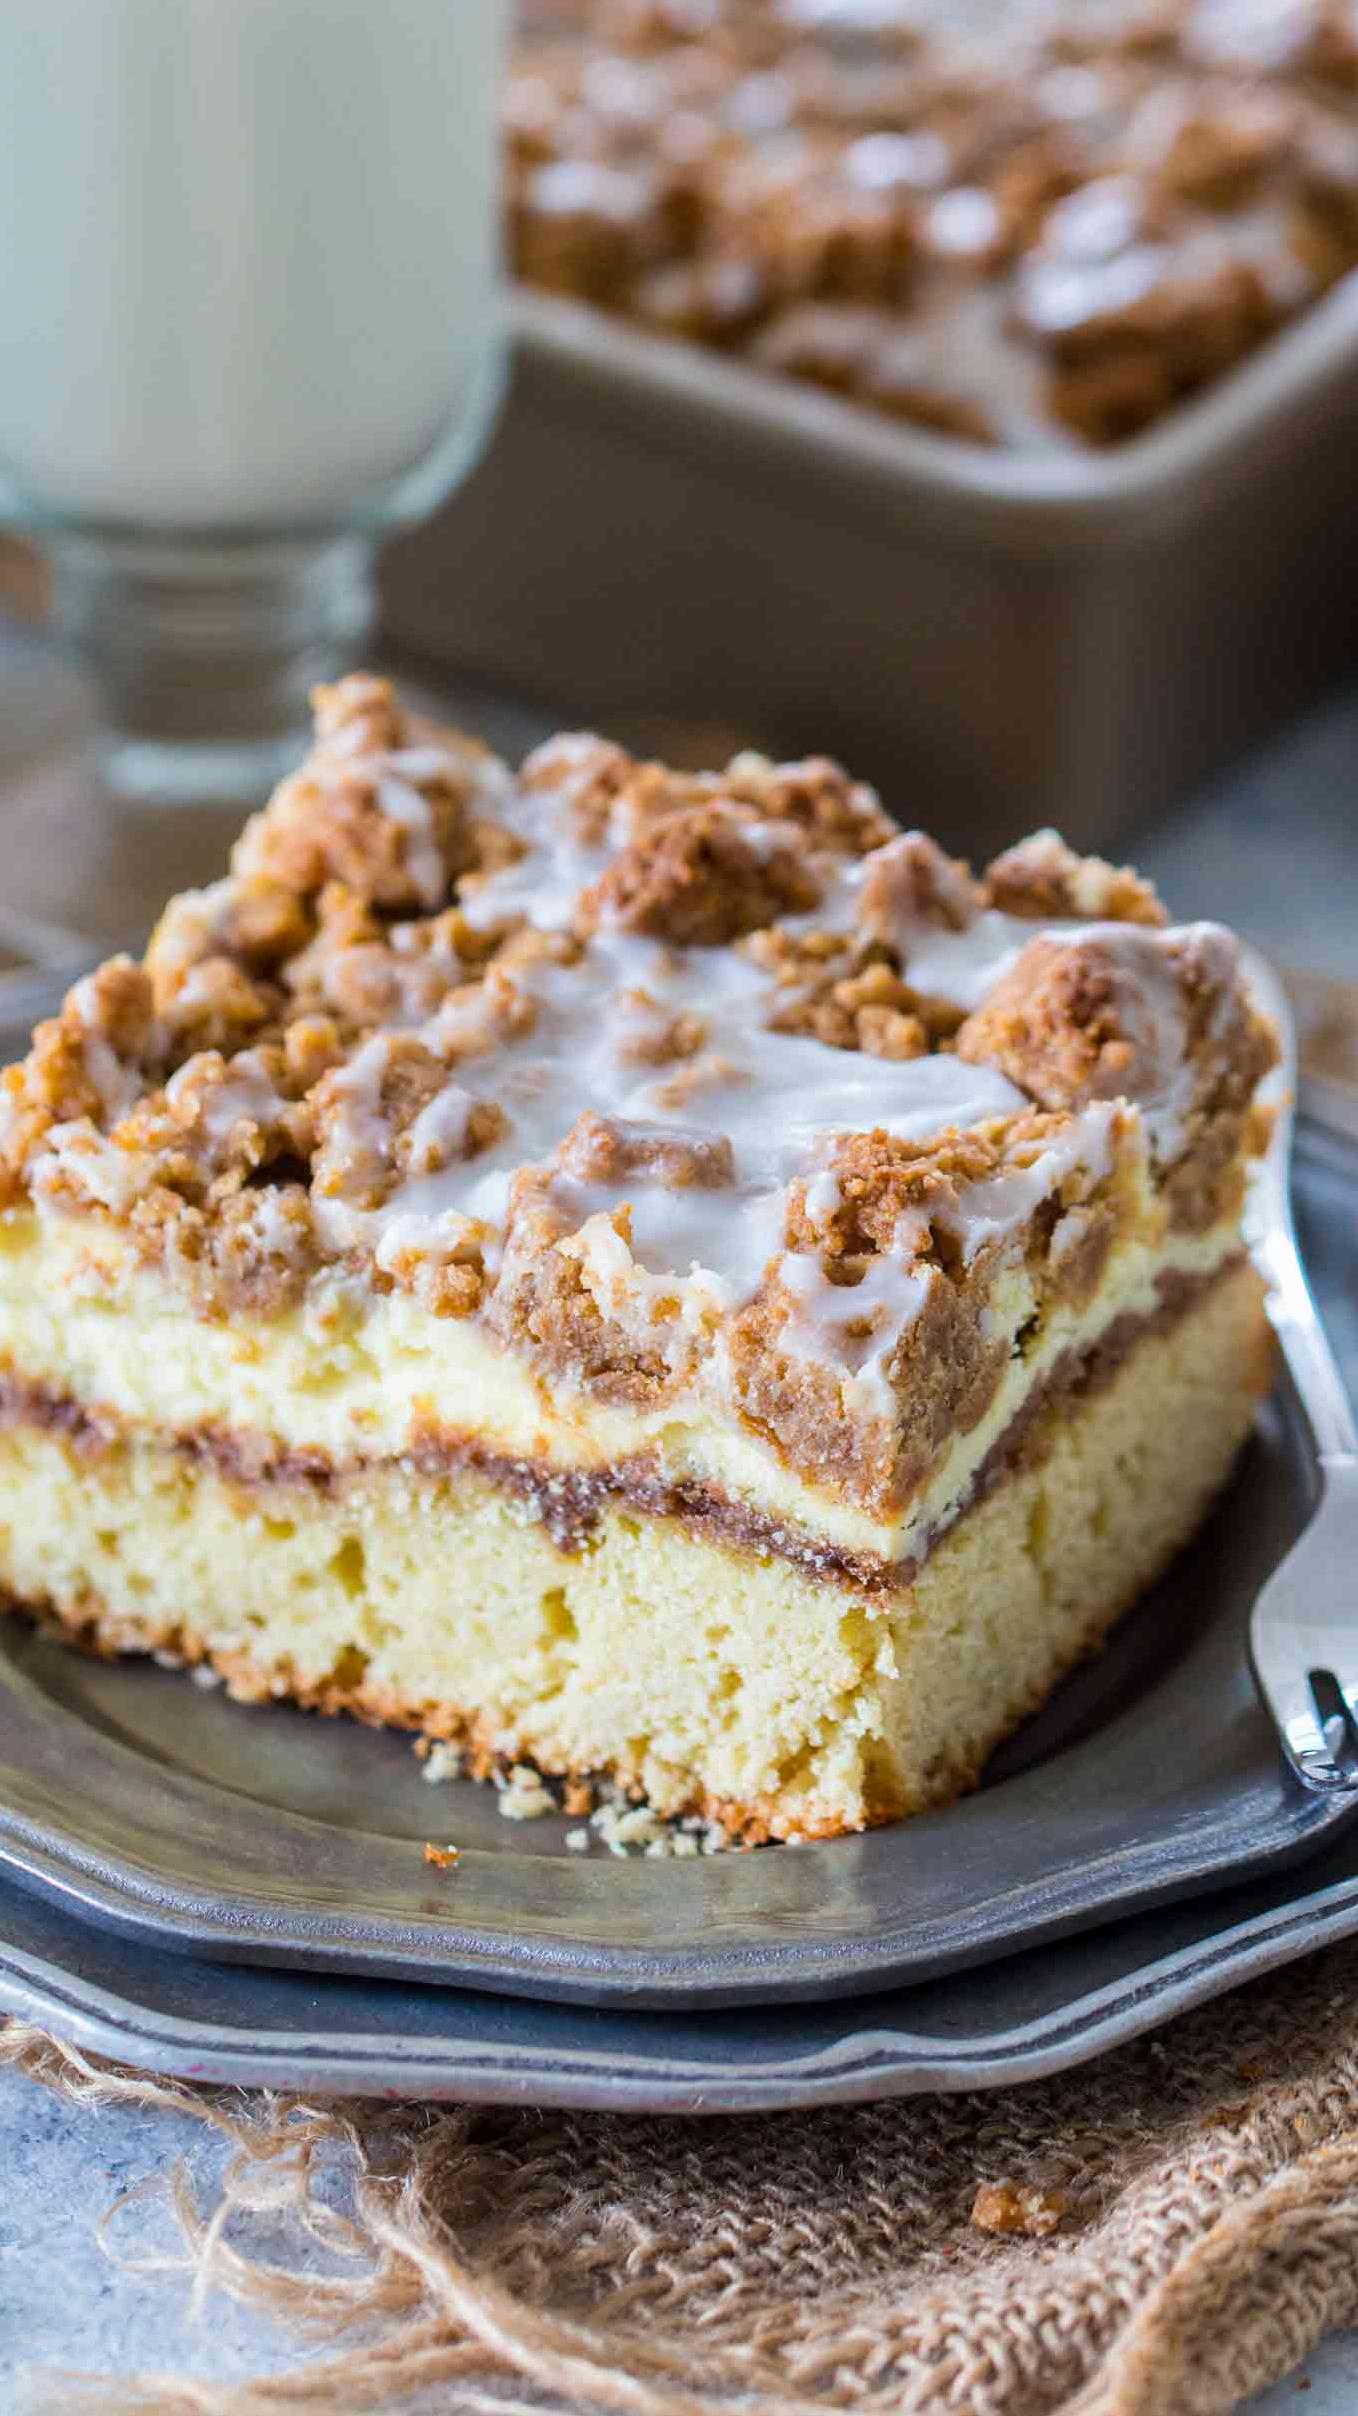  Prepare to be amazed by how easy it is to bake a delicious coffee cake right in your own kitchen.